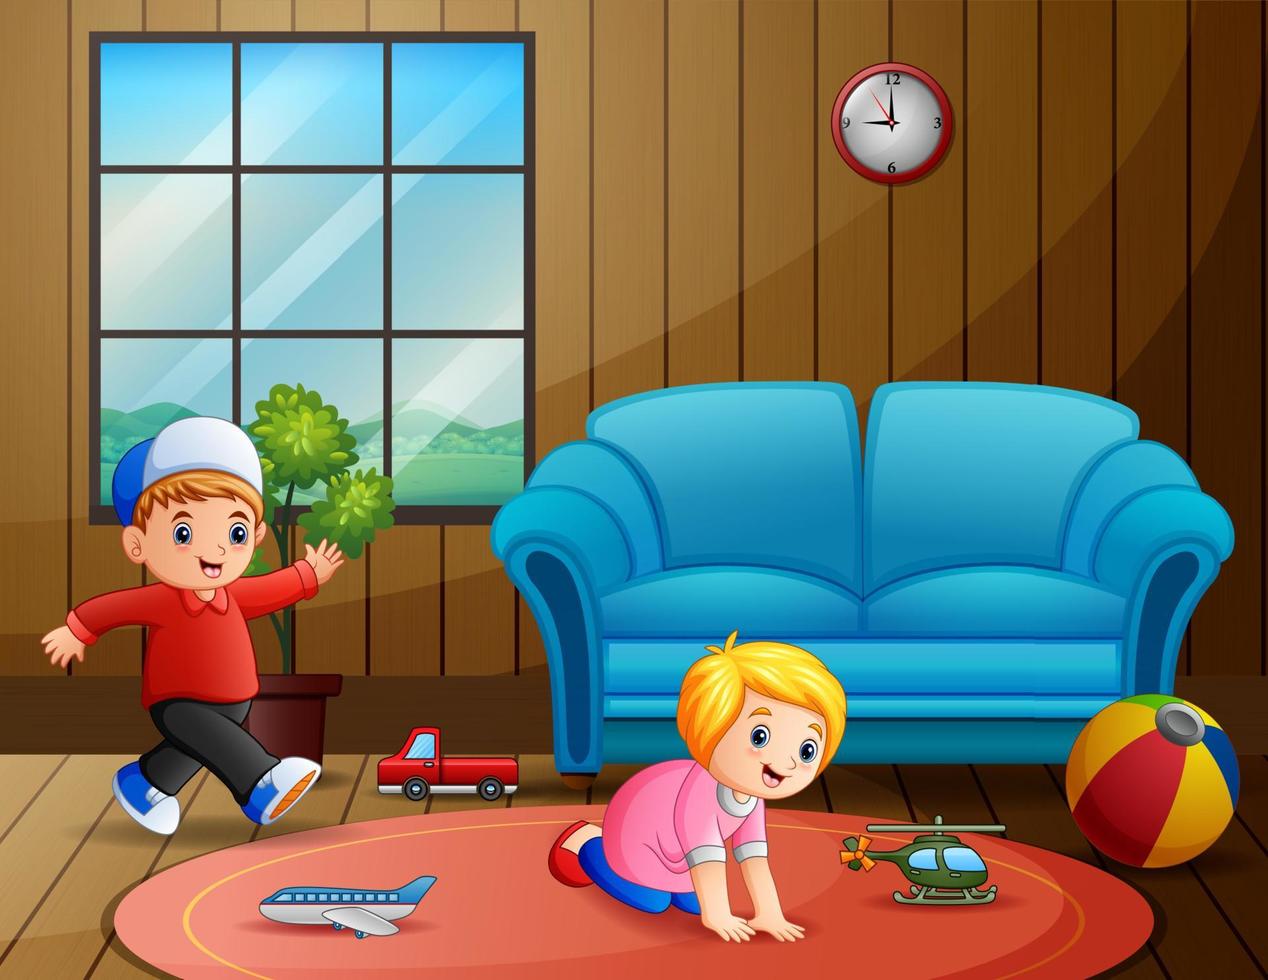 Children playing their toys inside the room vector